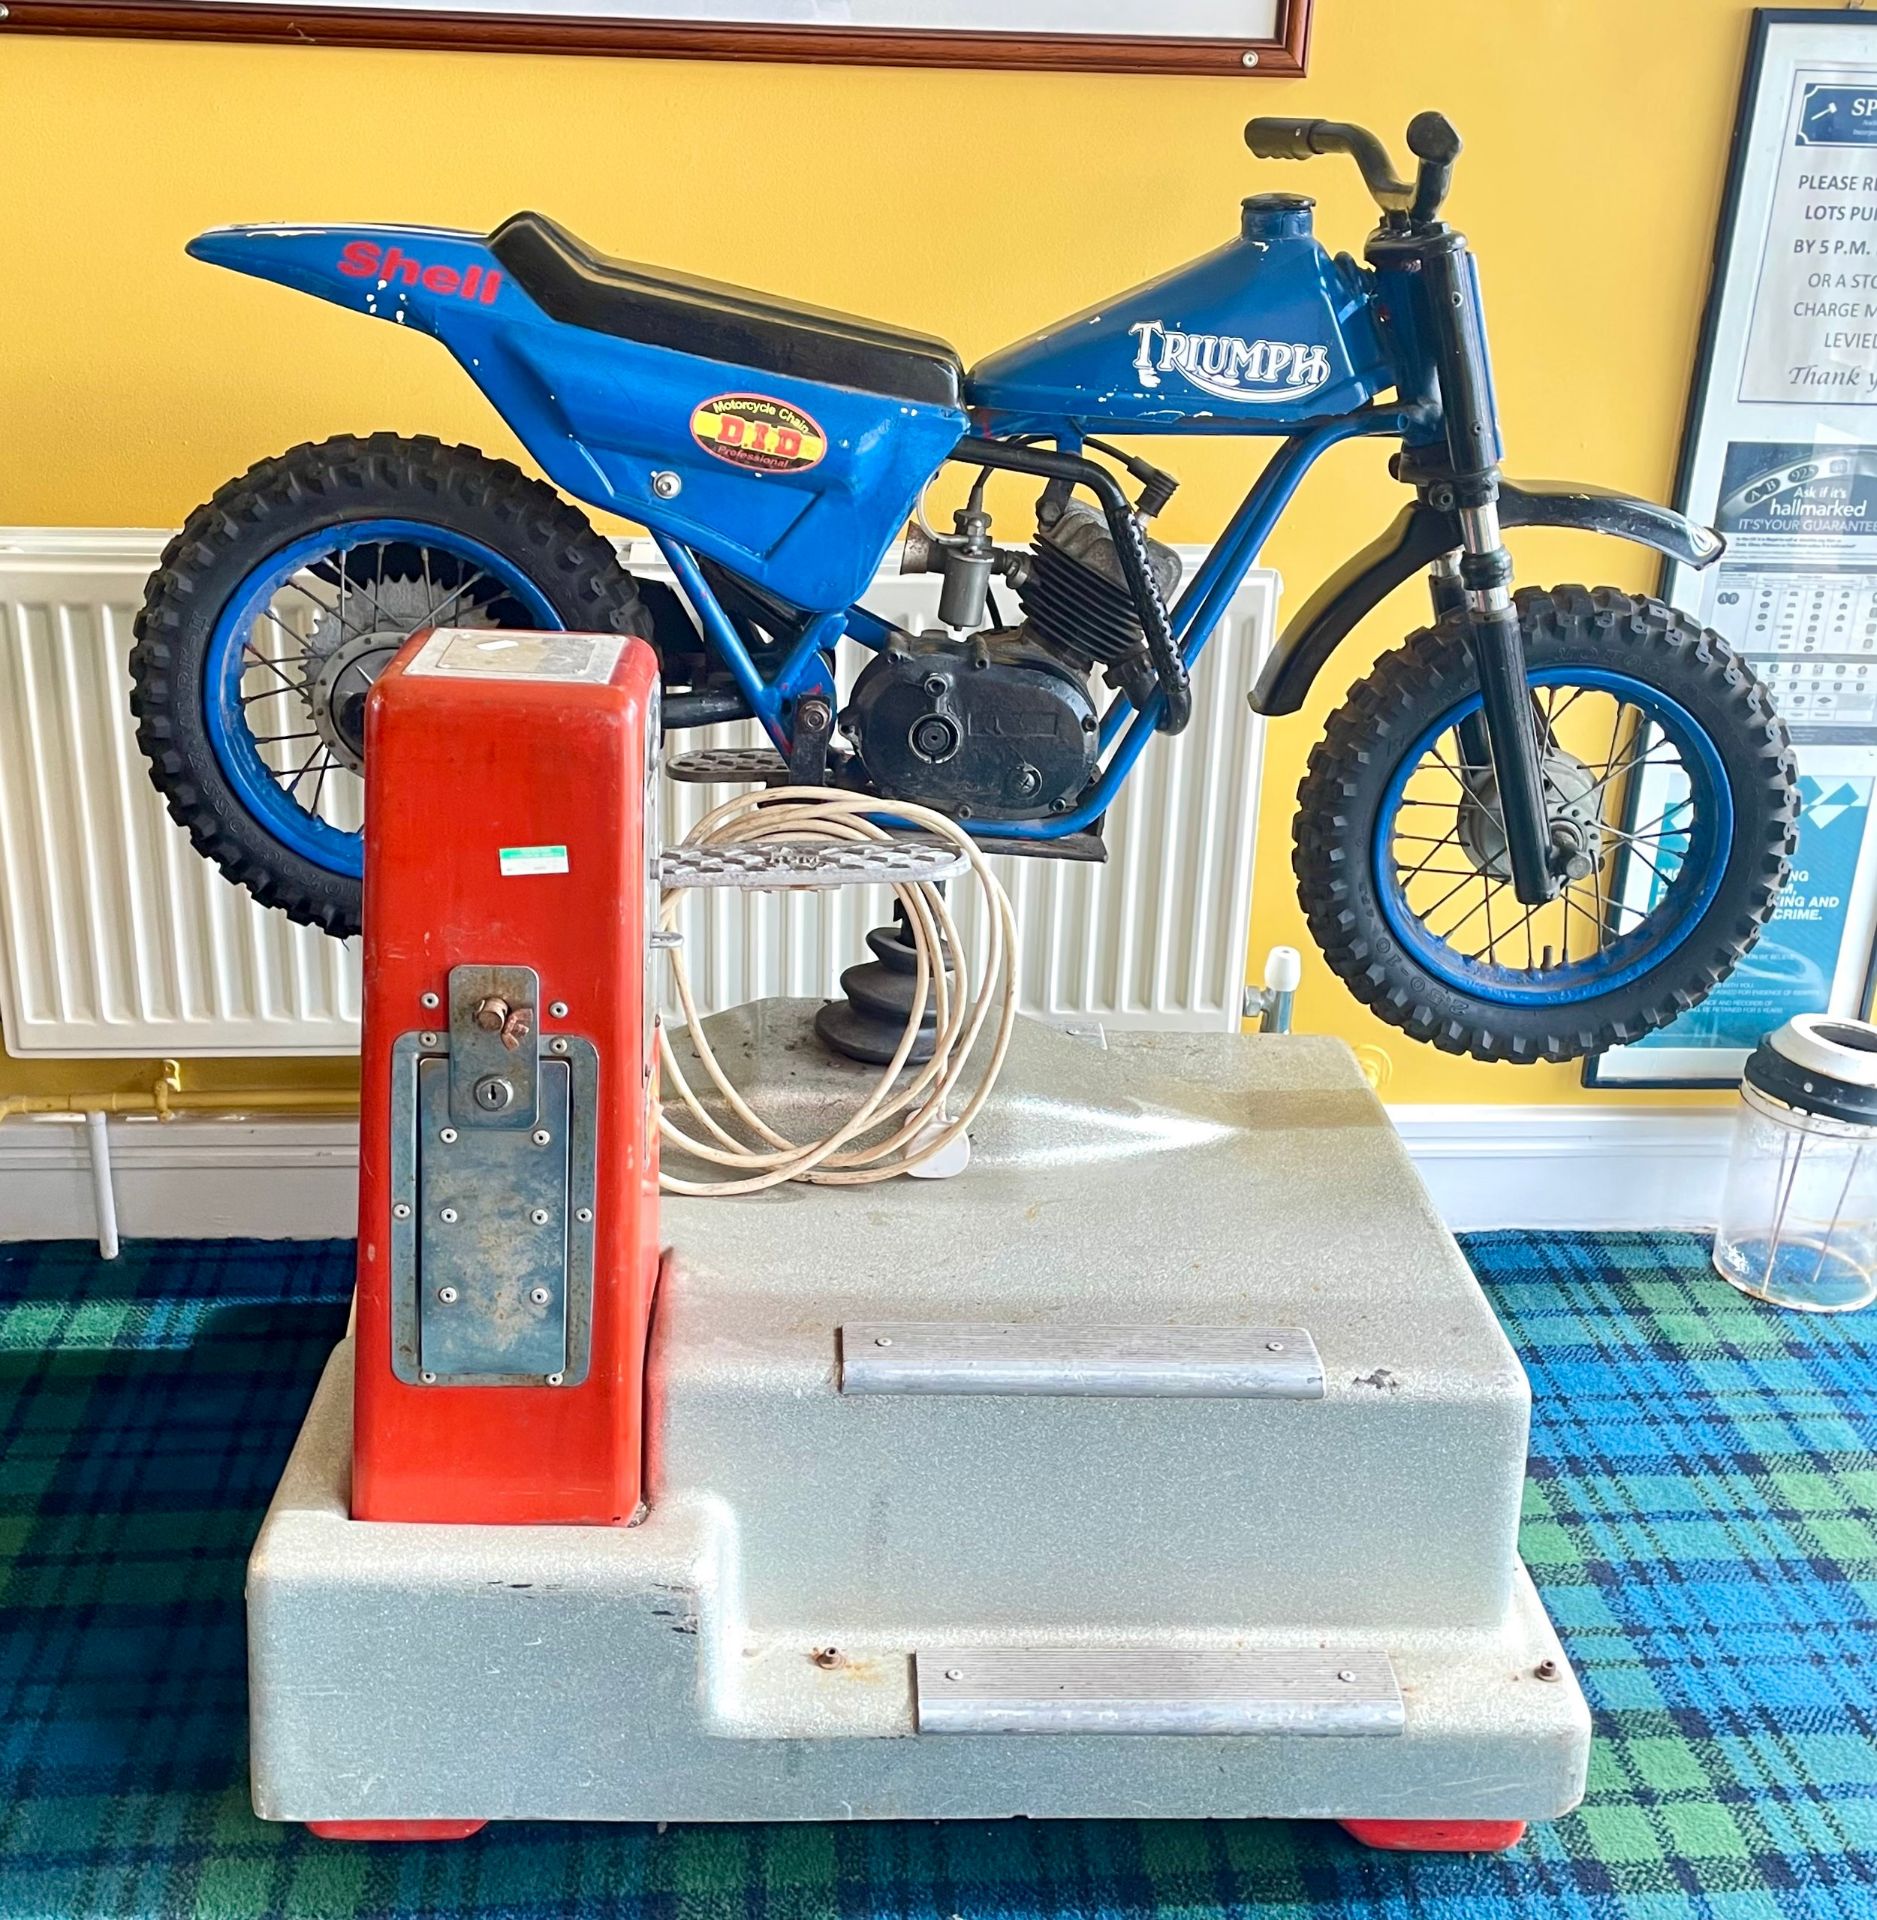 An arcade child's electro-mechanical motorcycle coin operated ride, 120 x 70 x 110cm